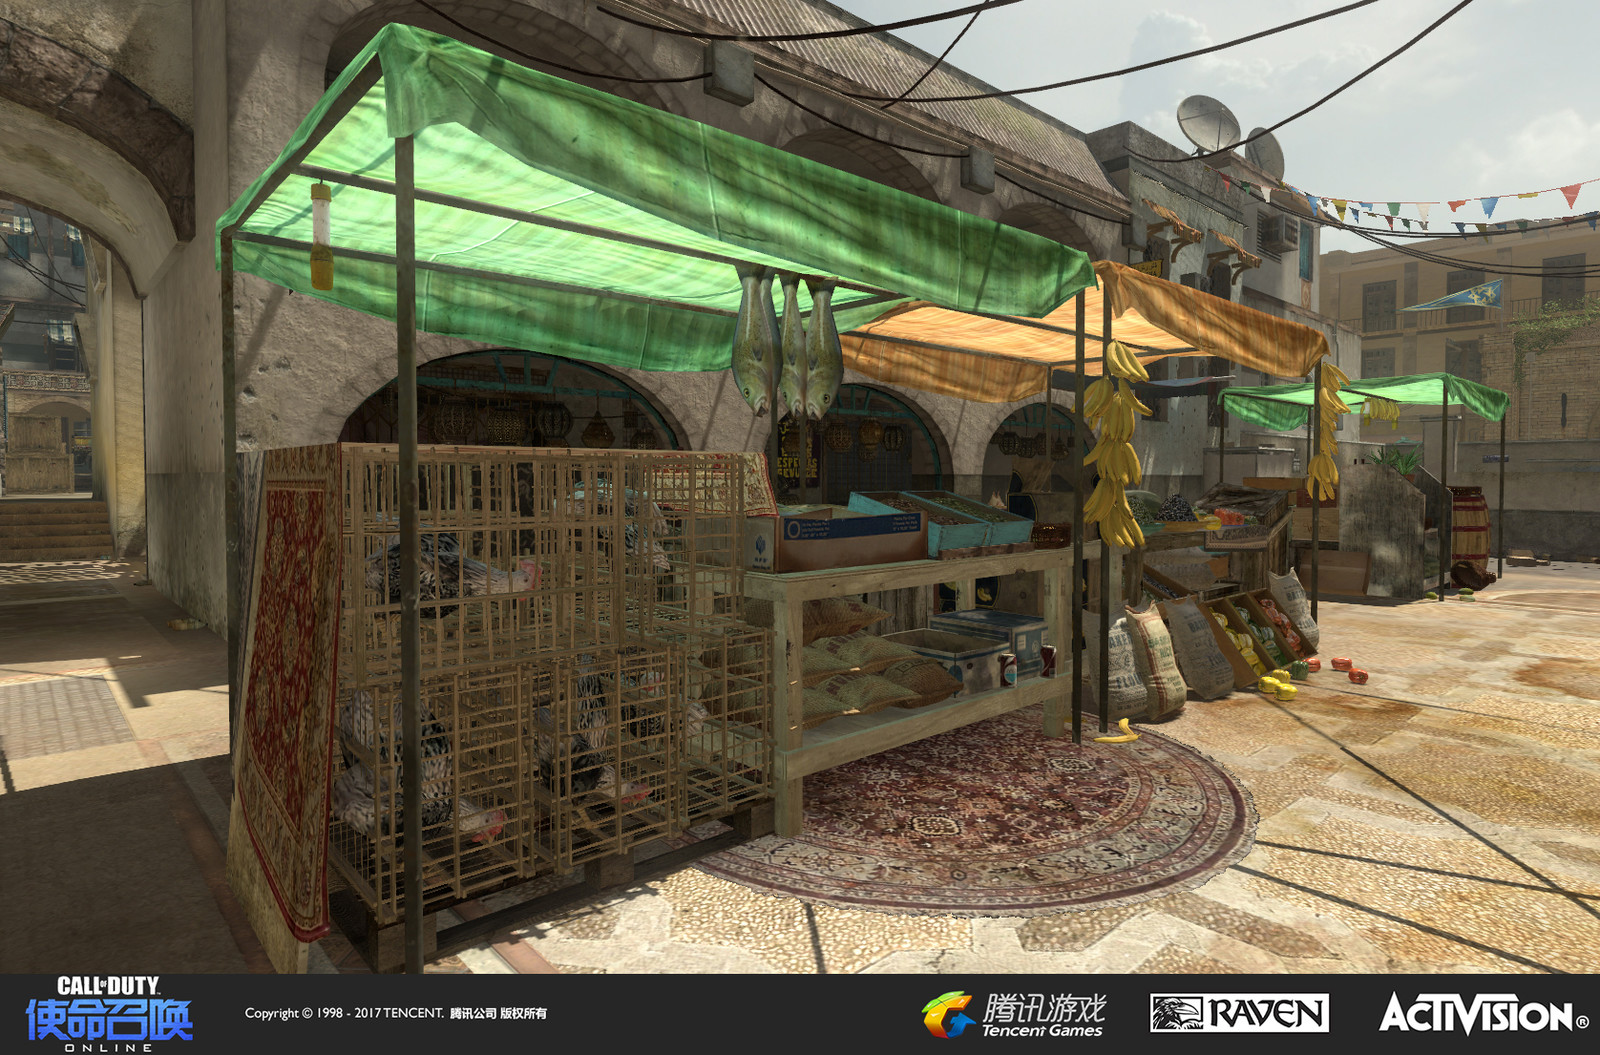 Seatown: A re-imagined multiplayer map originally appearing in Modern Warfare 3. I created the set dress and terrain here. One of our Shanghai artists created the cloth tops for the market stalls.